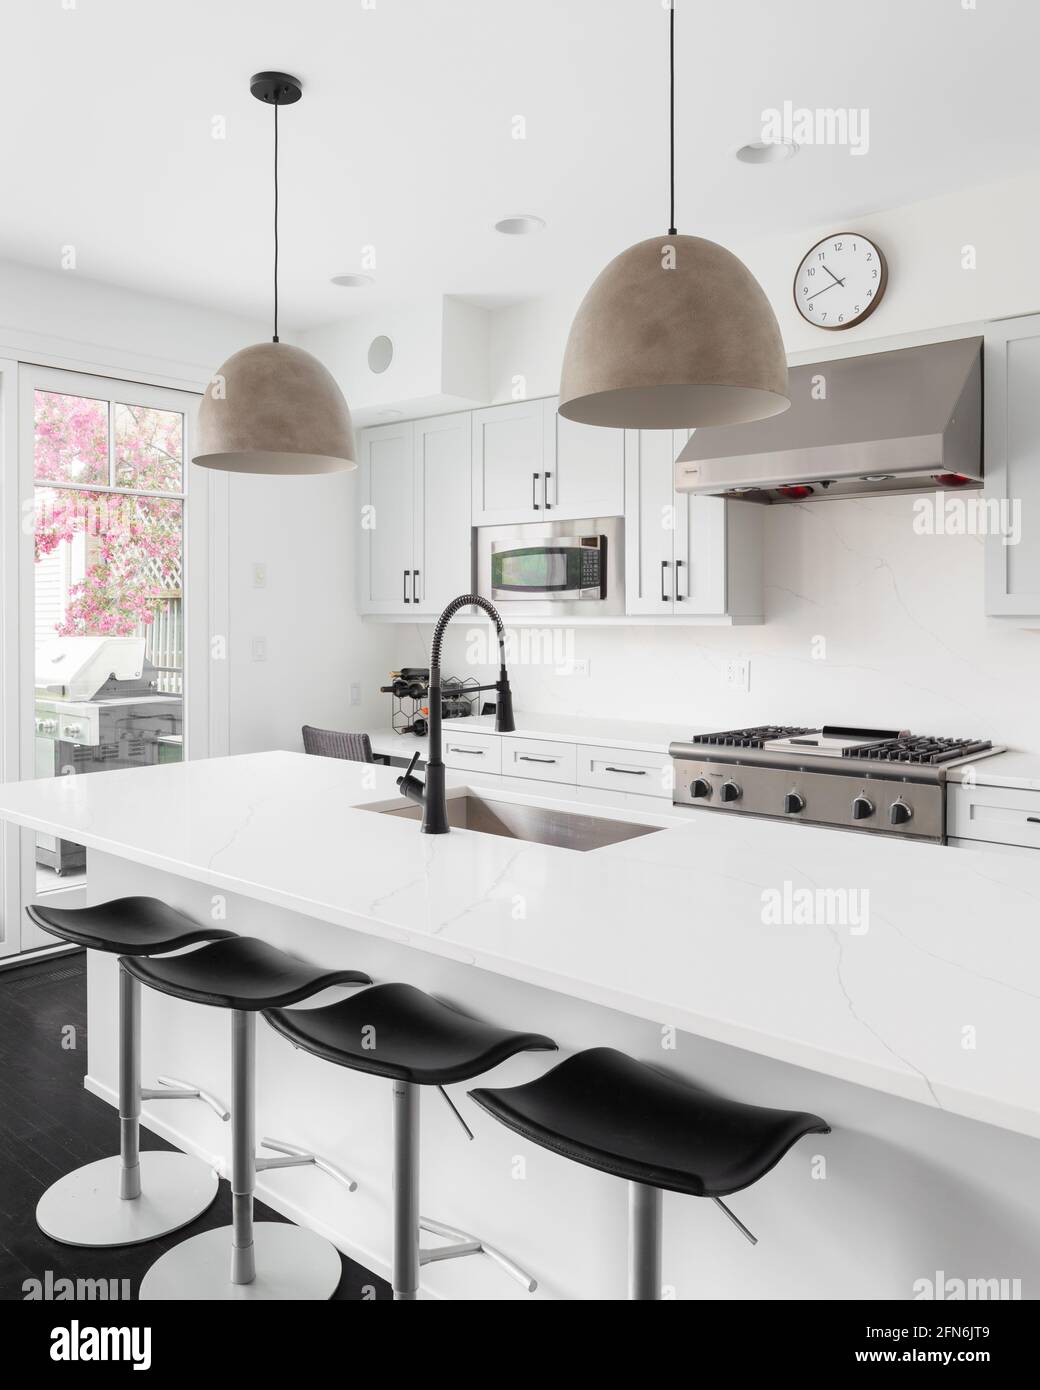 An elegant white kitchen with Thermador stainless steel appliances, large island with a granite countertop, and modern lights hanging above. Stock Photo